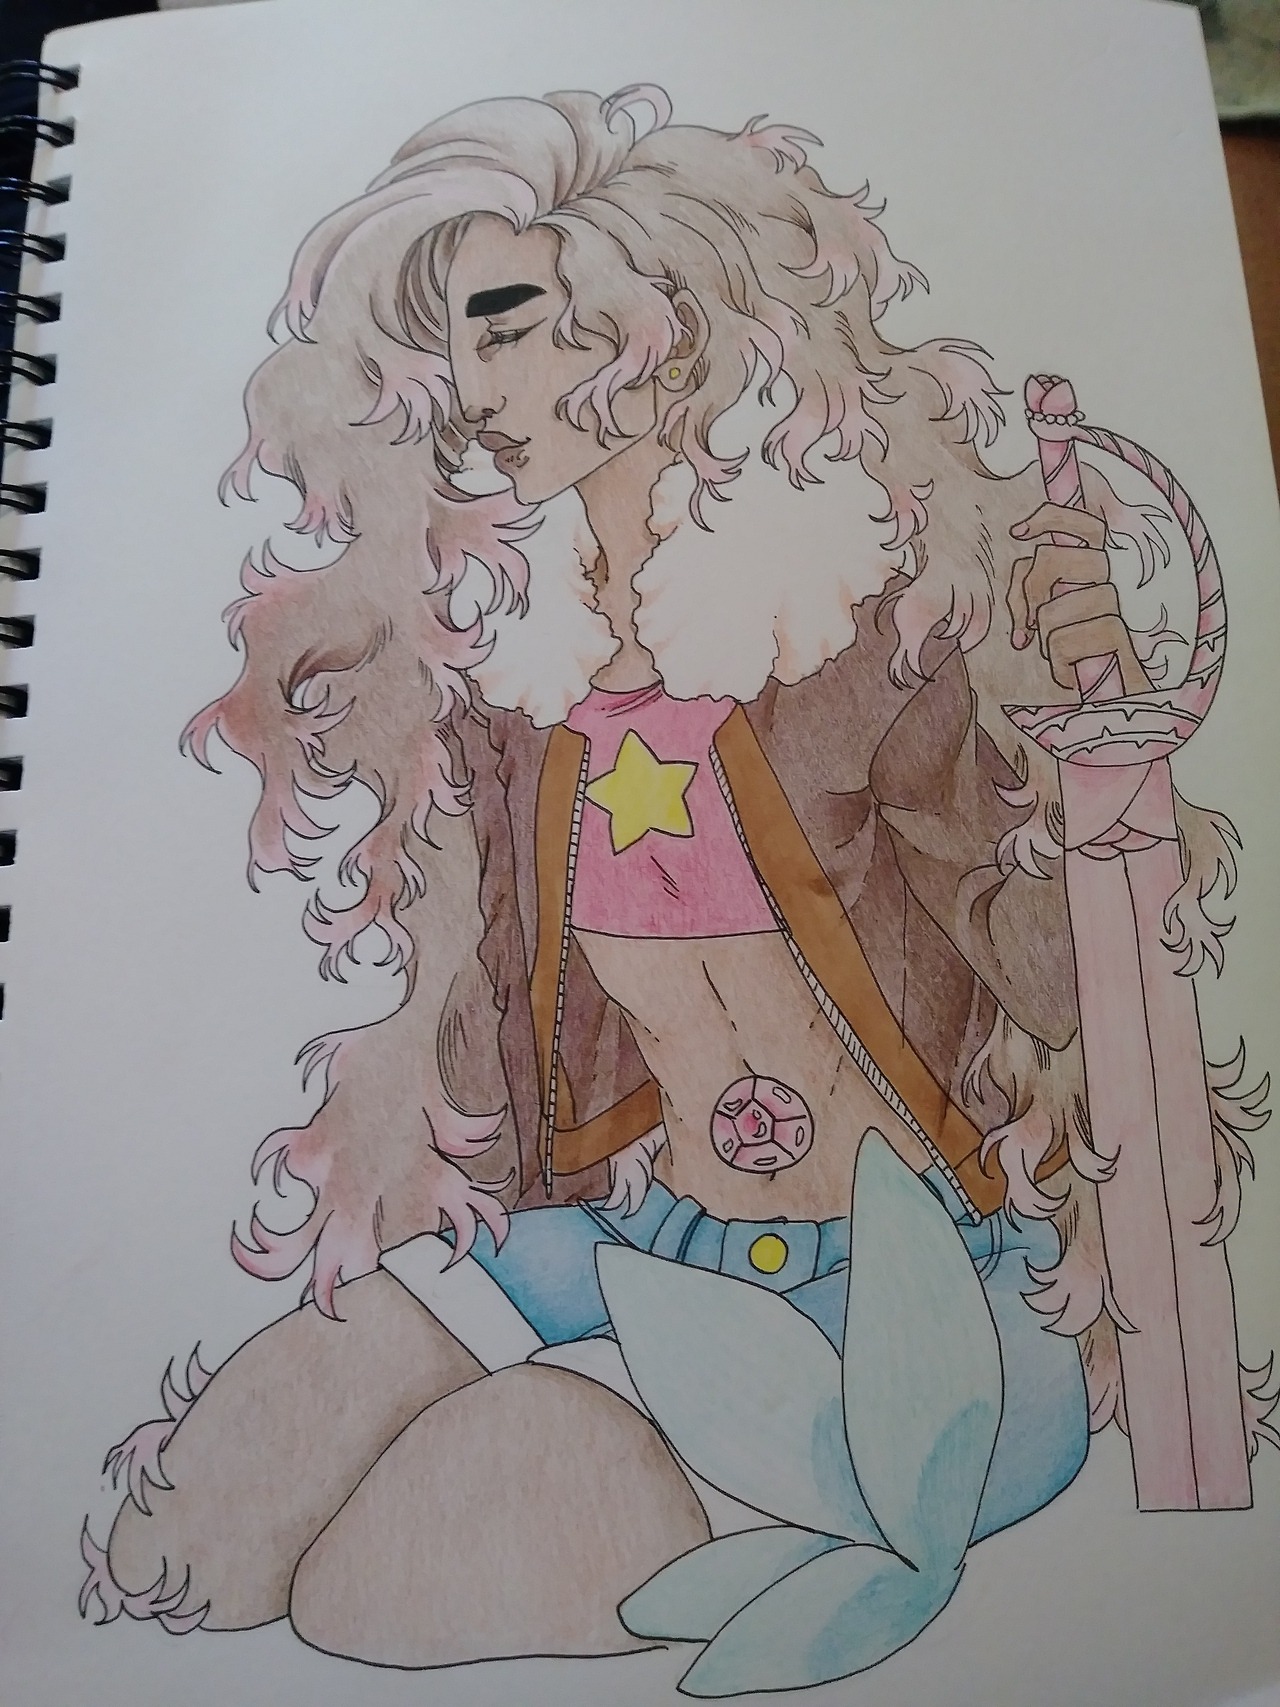 Finally caught up on Steven Universe so heres Stevonnie